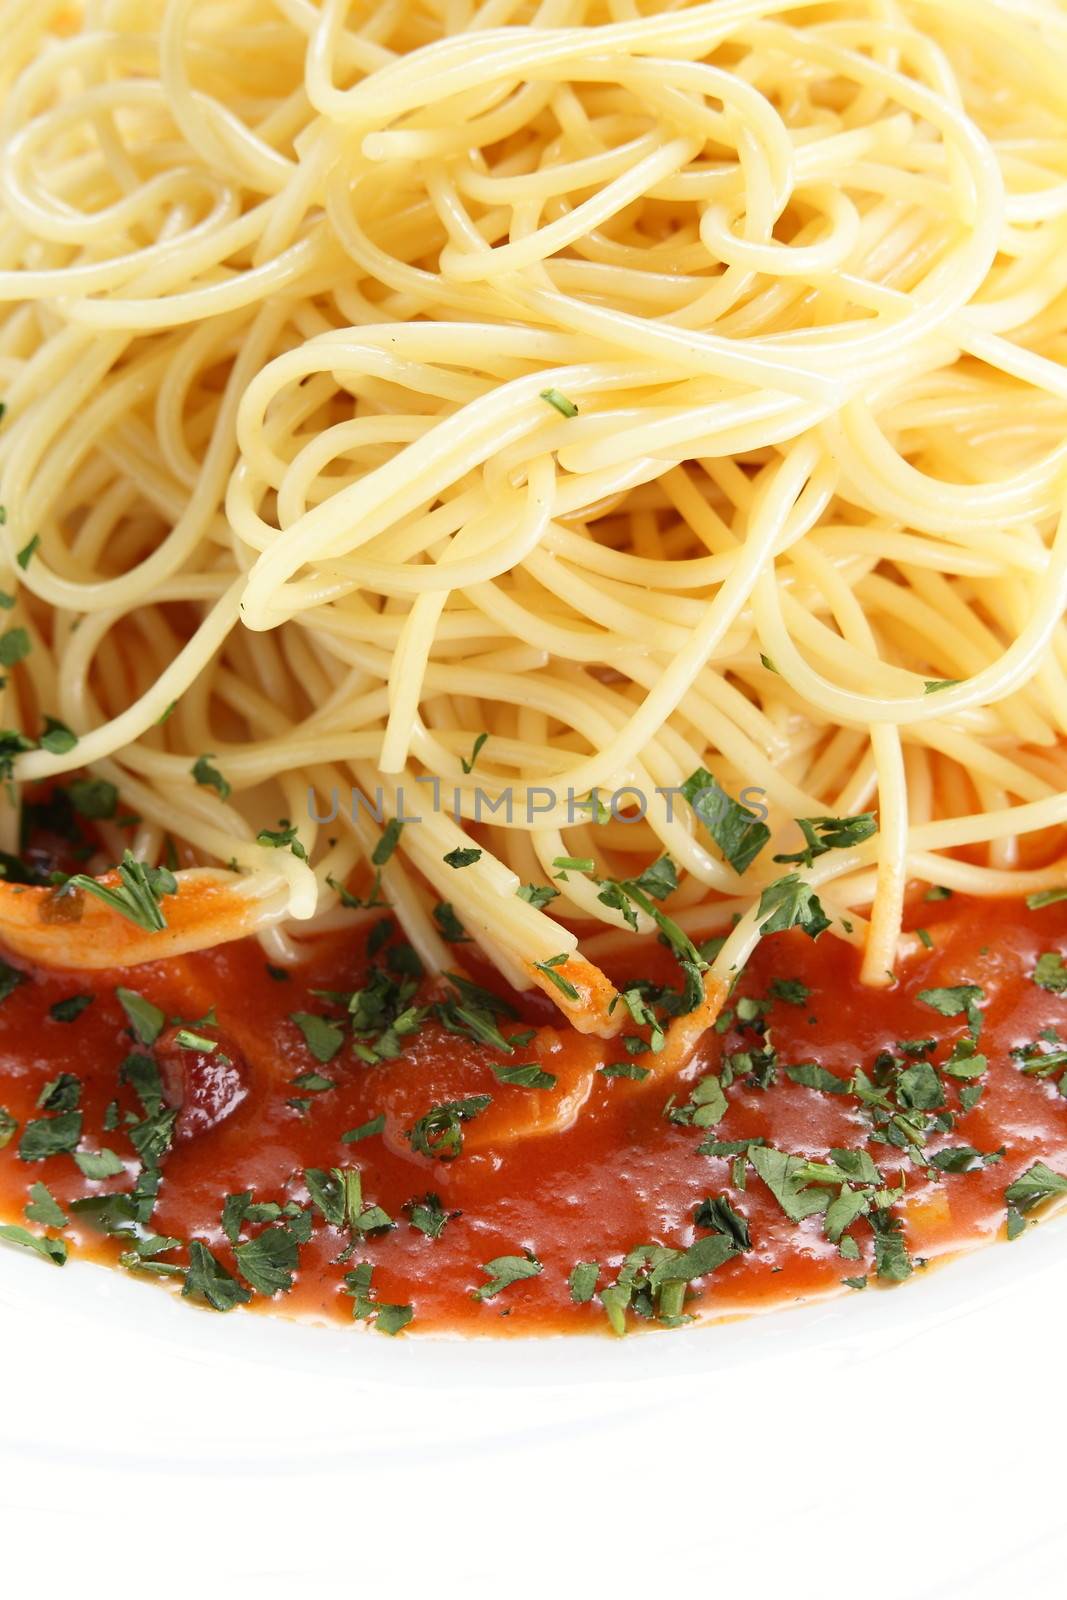 fresh and hot pasta with sauce by fiphoto